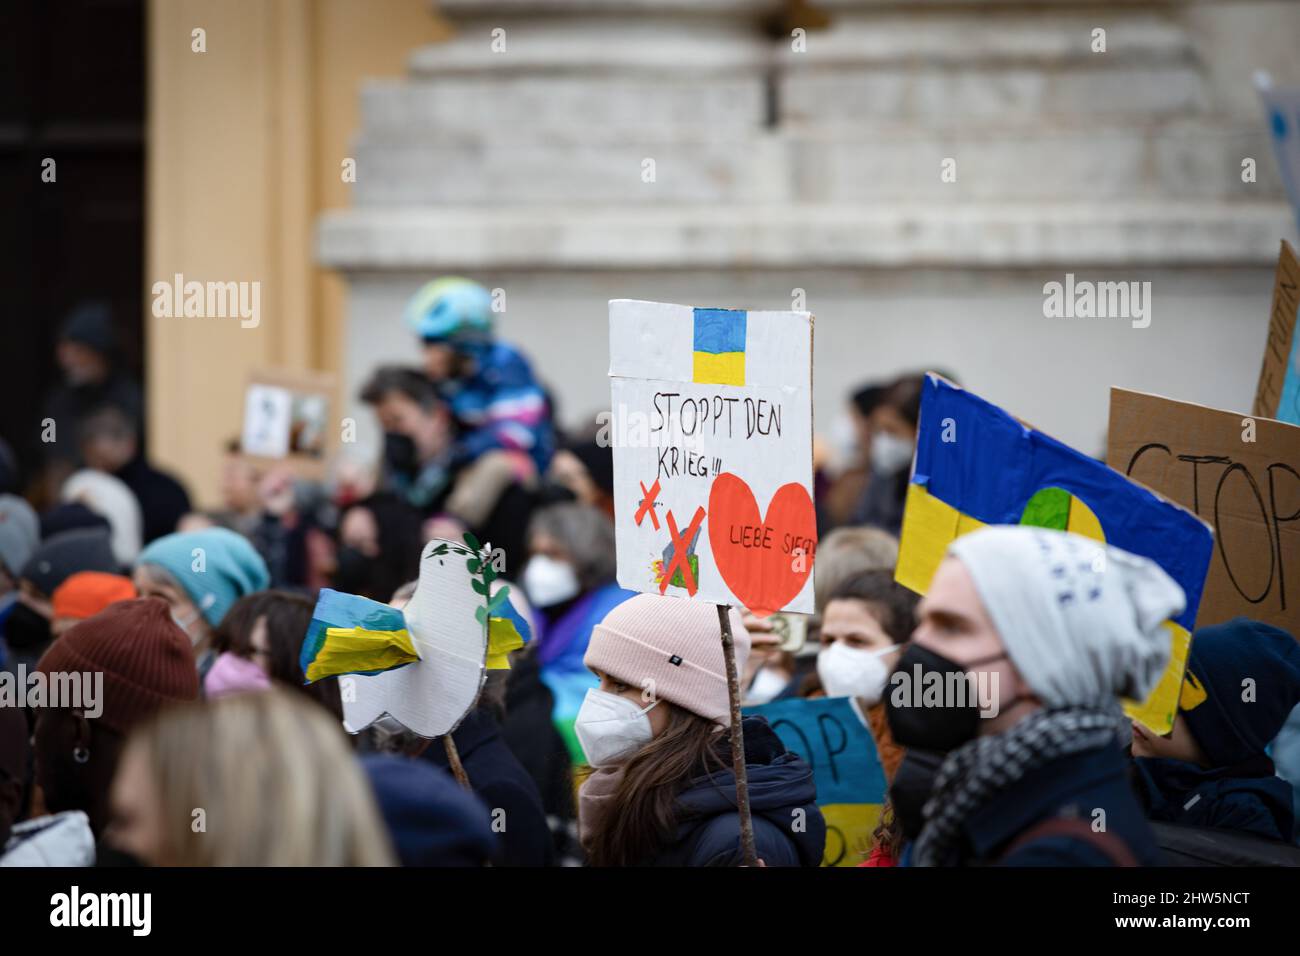 Munich, Germany. 03rd Mar, 2022. On March 3nd, 2022 2,000 people gathered at Odeonsplatz in Munich, Germany to protest against the Russian invasion in the Ukraine and to show their solidarity with the Ukranian people. The rally was organized by Fridays for Future Munich. Sign reading: 'Stoppt den Krieg!!! Liebe siegt!' 'Stop the war!!! Love wins!' (Photo by Alexander Pohl/Sipa USA) Credit: Sipa USA/Alamy Live News Stock Photo